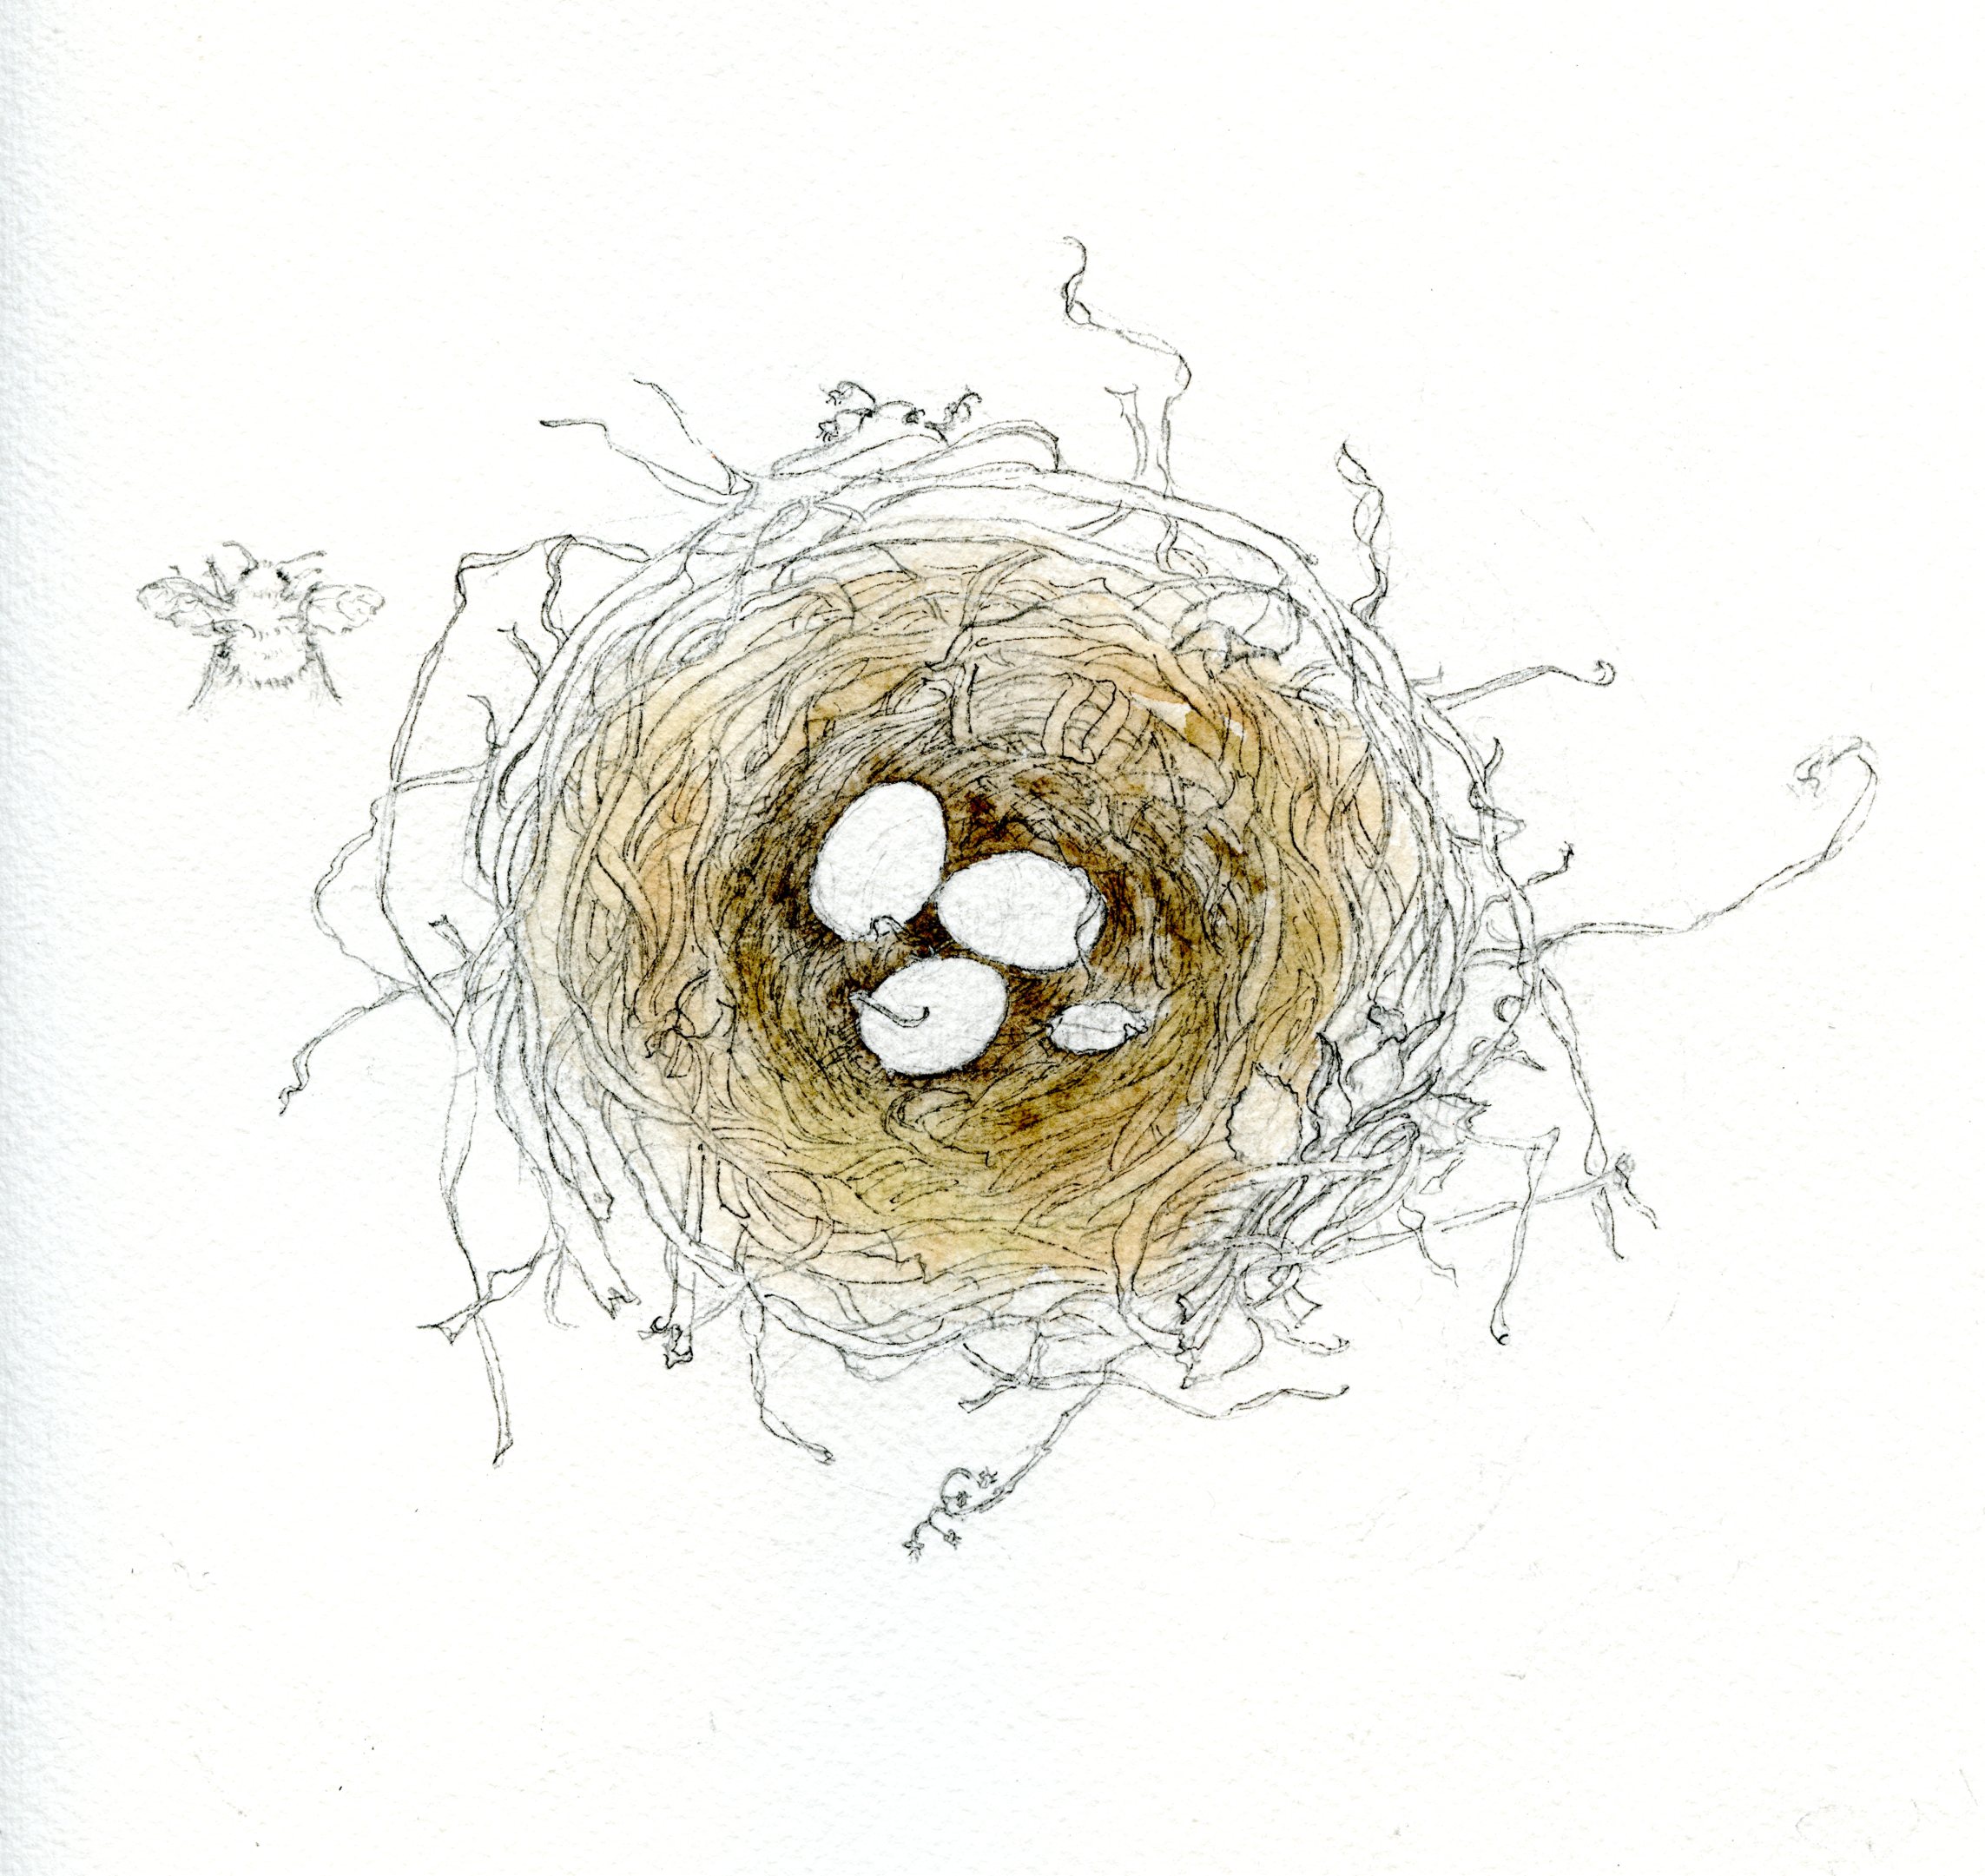 2286x2161 how to draw a bird's nest and add color - Birds Nest Drawing.